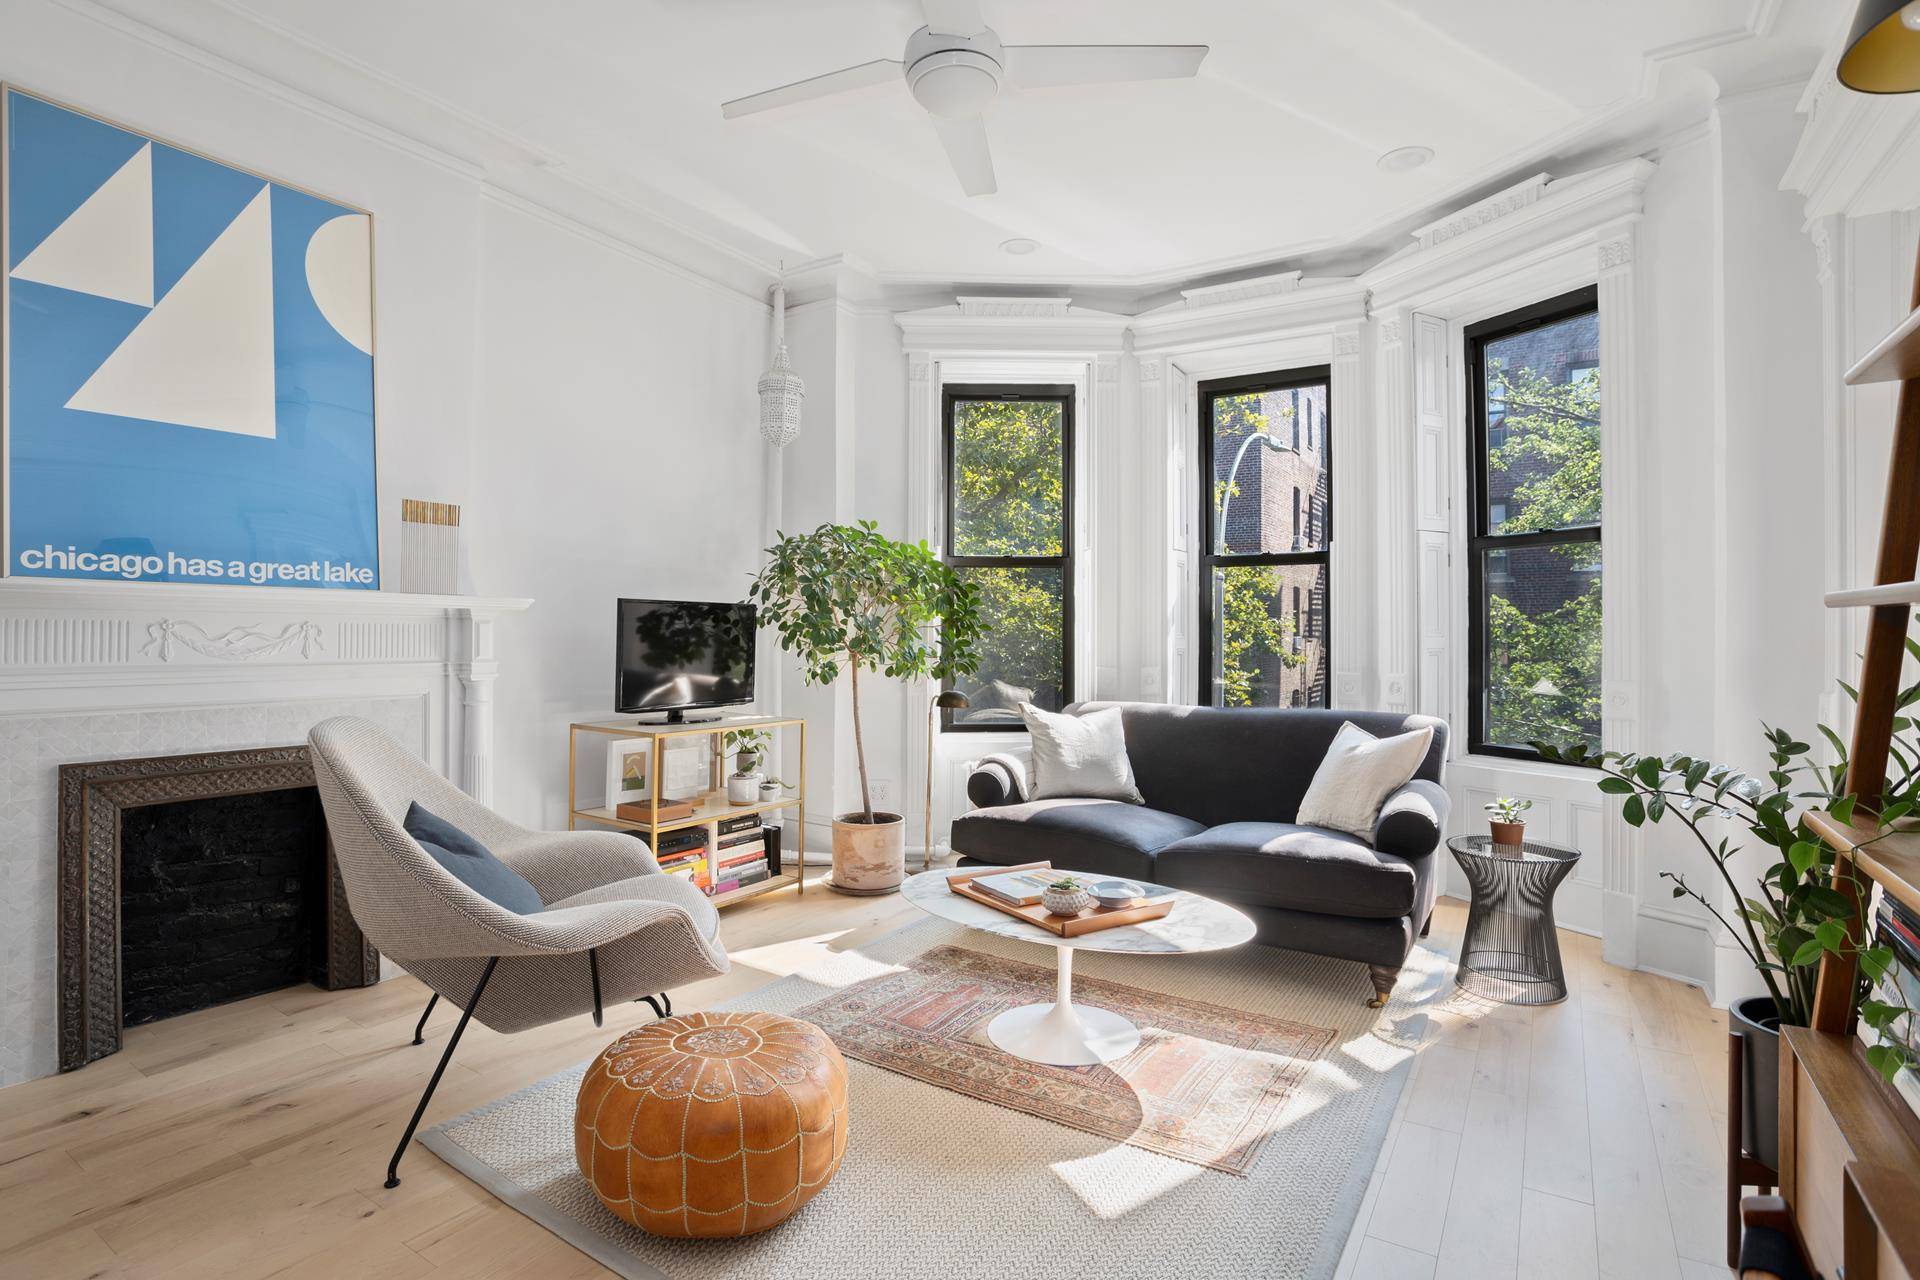 Enjoy amazing Southern light, classic Park Slope tree lined streets, and gorgeous renovations integrating prewar details and contemporary design and flow.